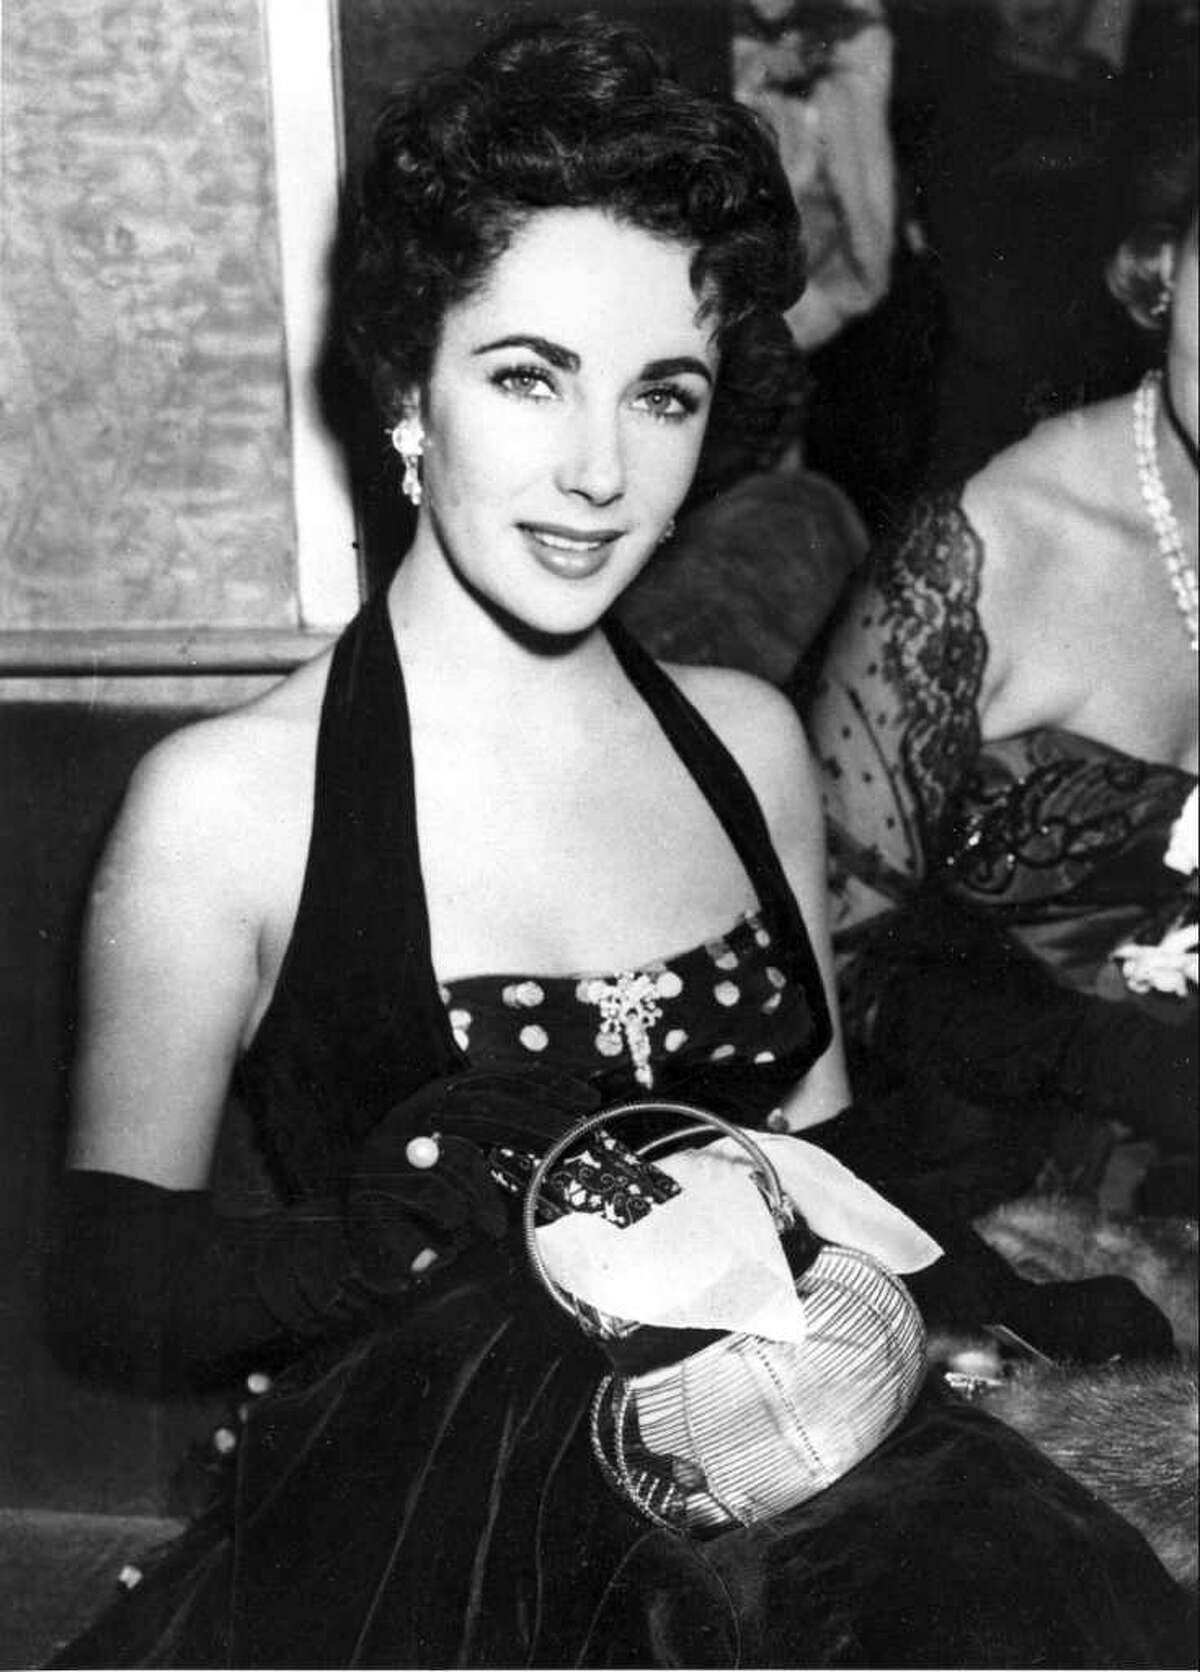 American actress Elizabeth Taylor is shown at the premiere of "The Lady with the Lamp" at the Warner Theater in London, England, Sept. 22, 1951. (AP Photo)